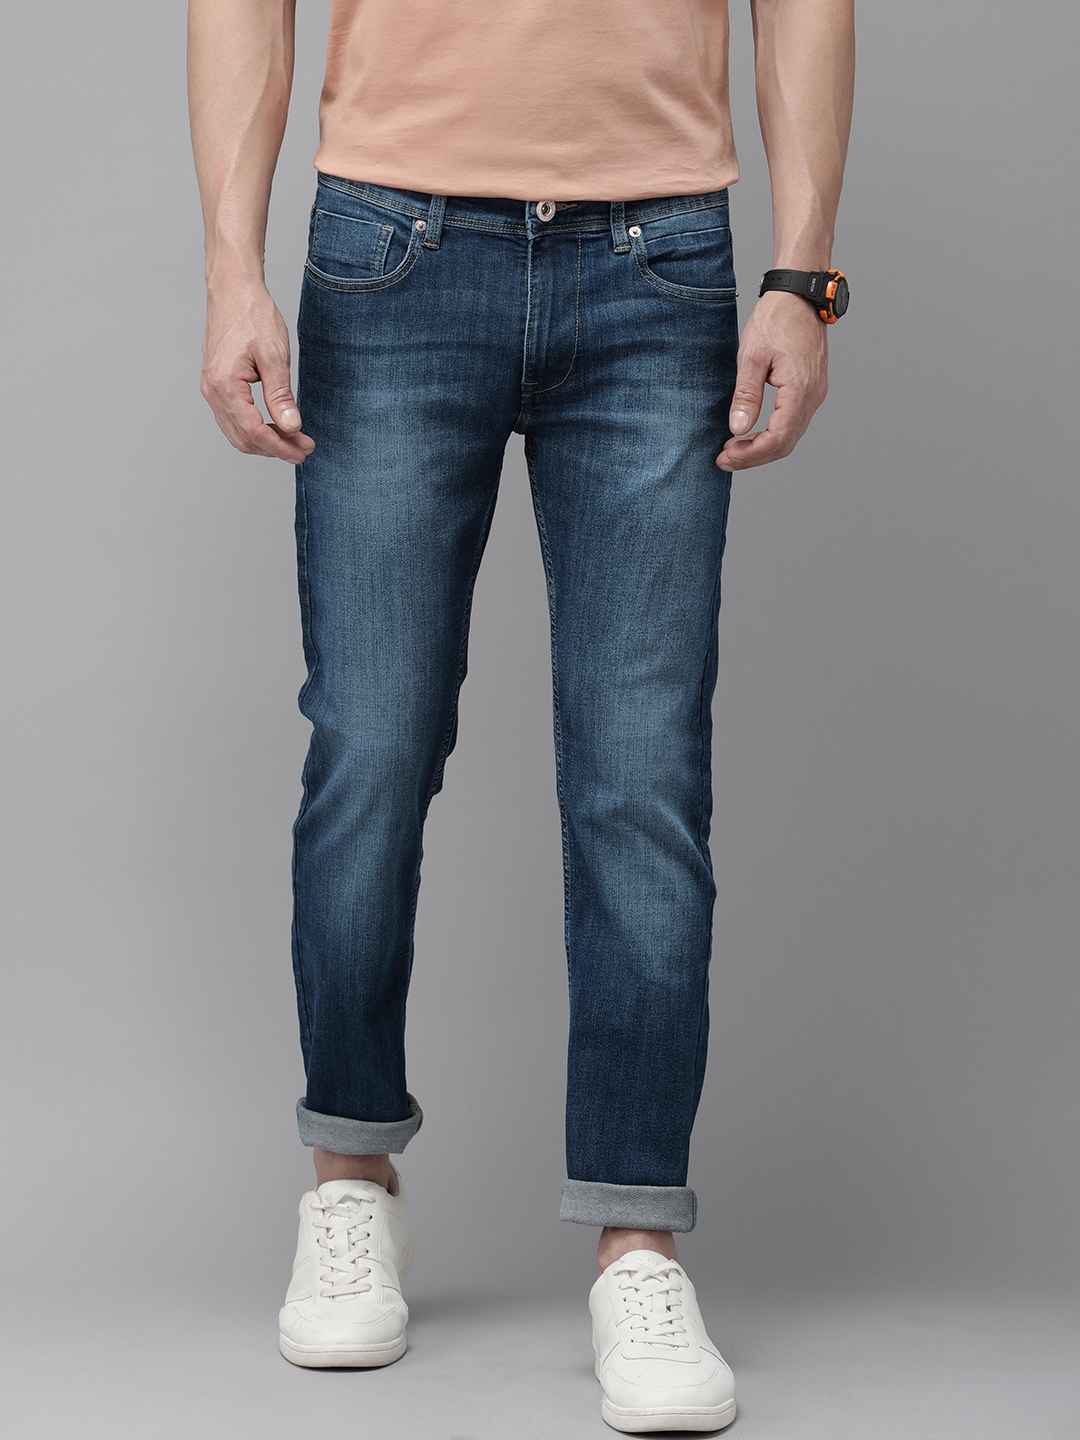 Buy BEAT LONDON By PEPE JEANS Men Blue Tapered Fit Light Fade ...